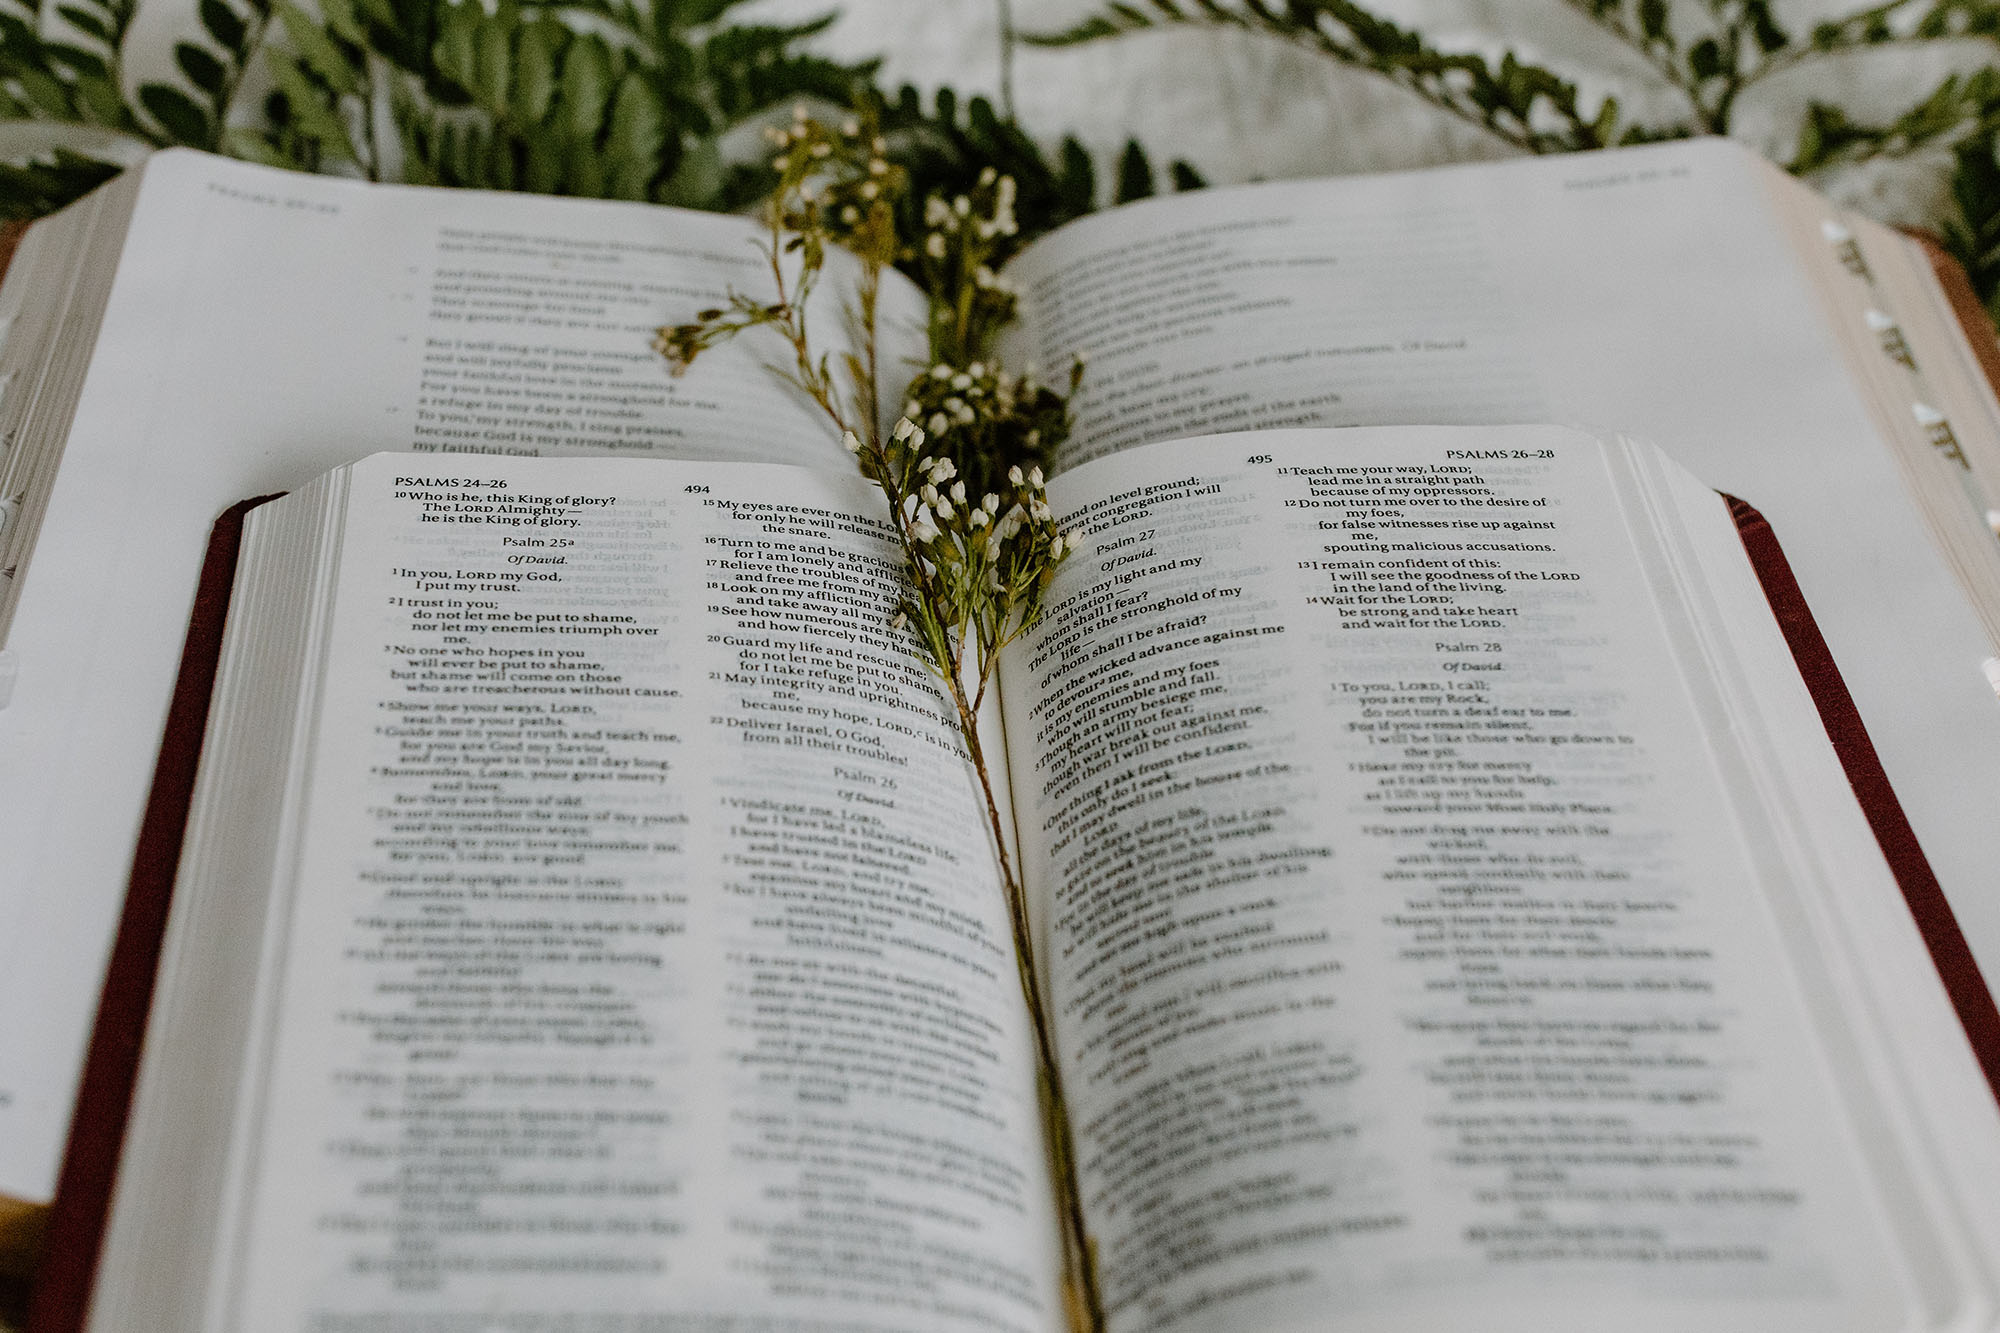 How to Deepen Your Reading of Scripture?